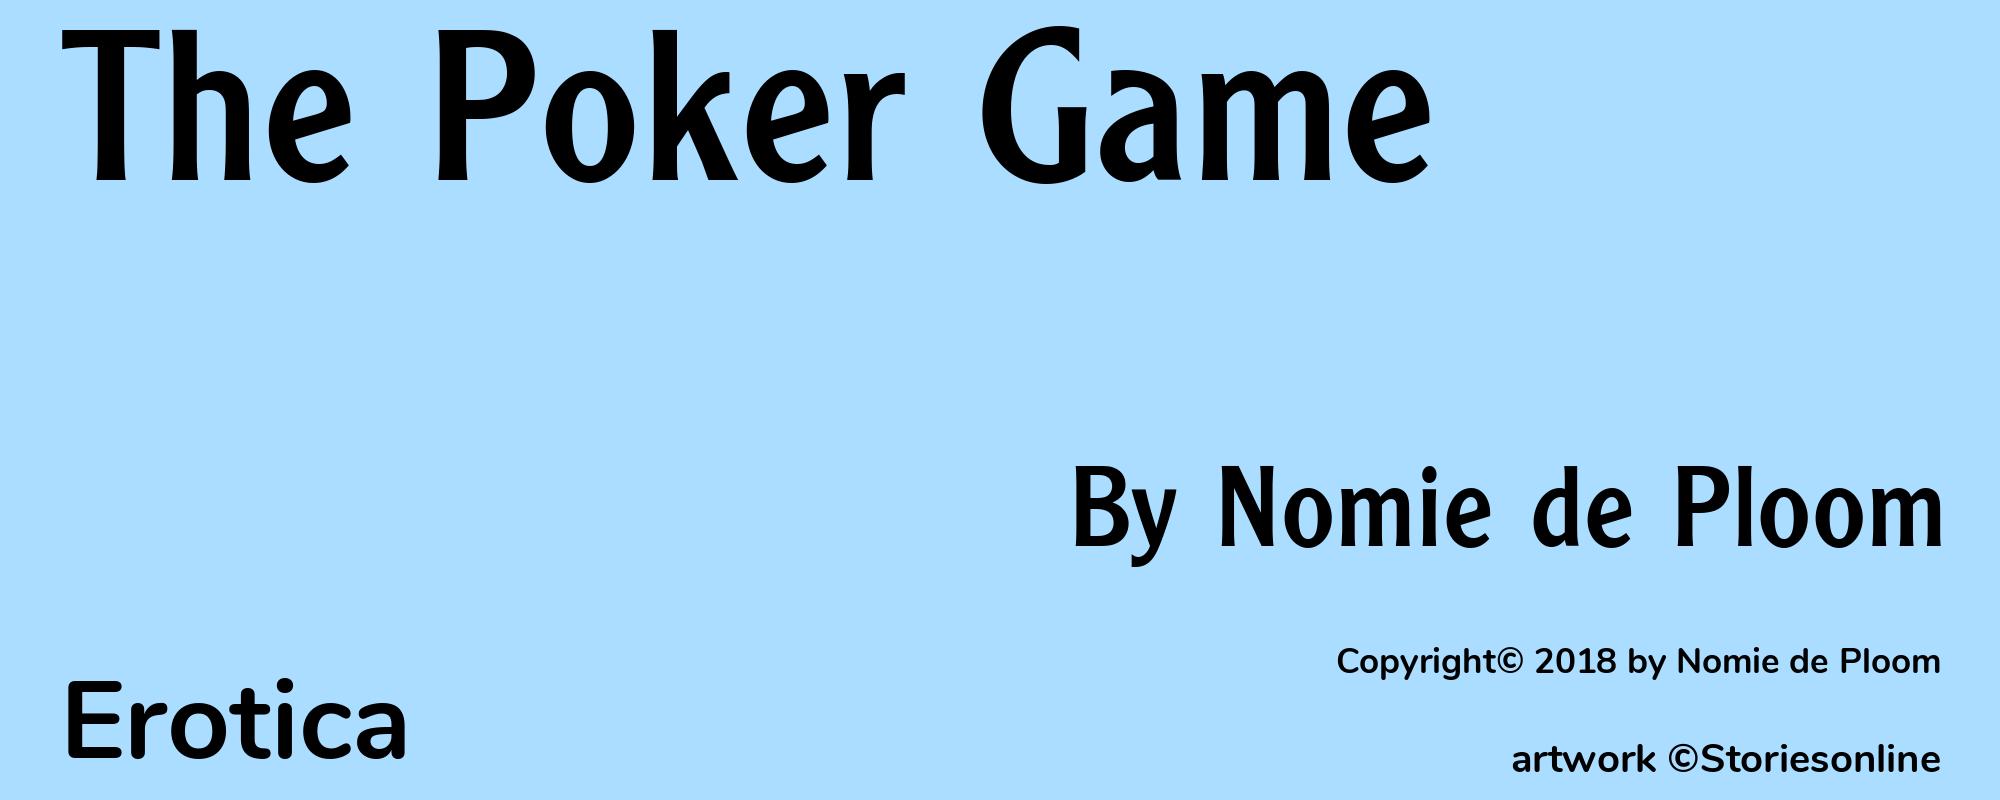 The Poker Game - Cover